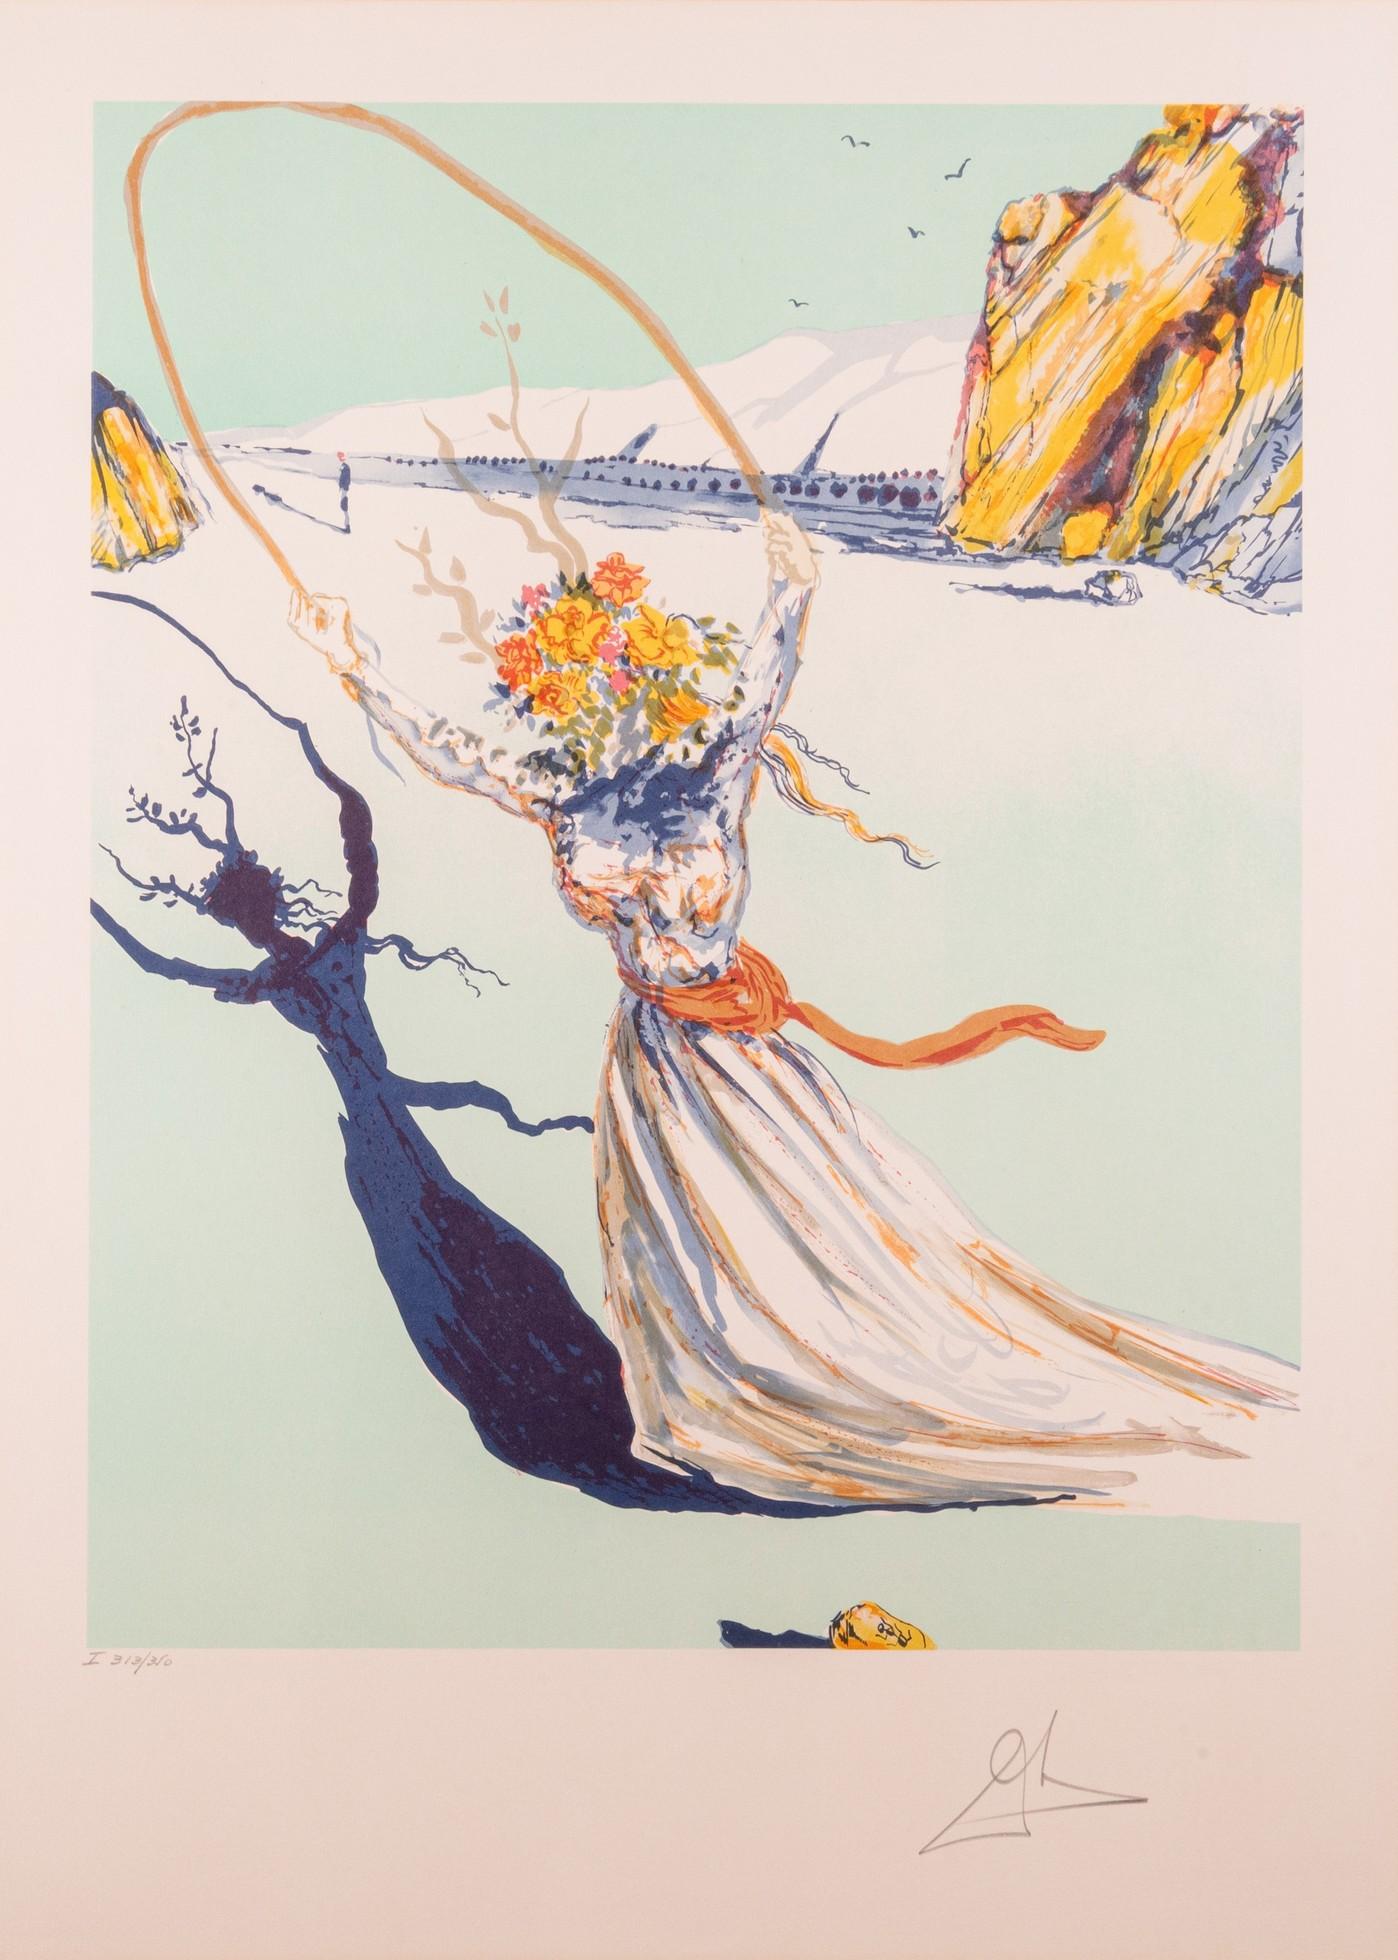 A classic surrealist lithograph on paper titled “Transcendent Passage” by Salvador Dali. Hand signed in pencil on the bottom right with an annotation of I 313/350 on the bottom left. Published in 1979. This piece can be found in 